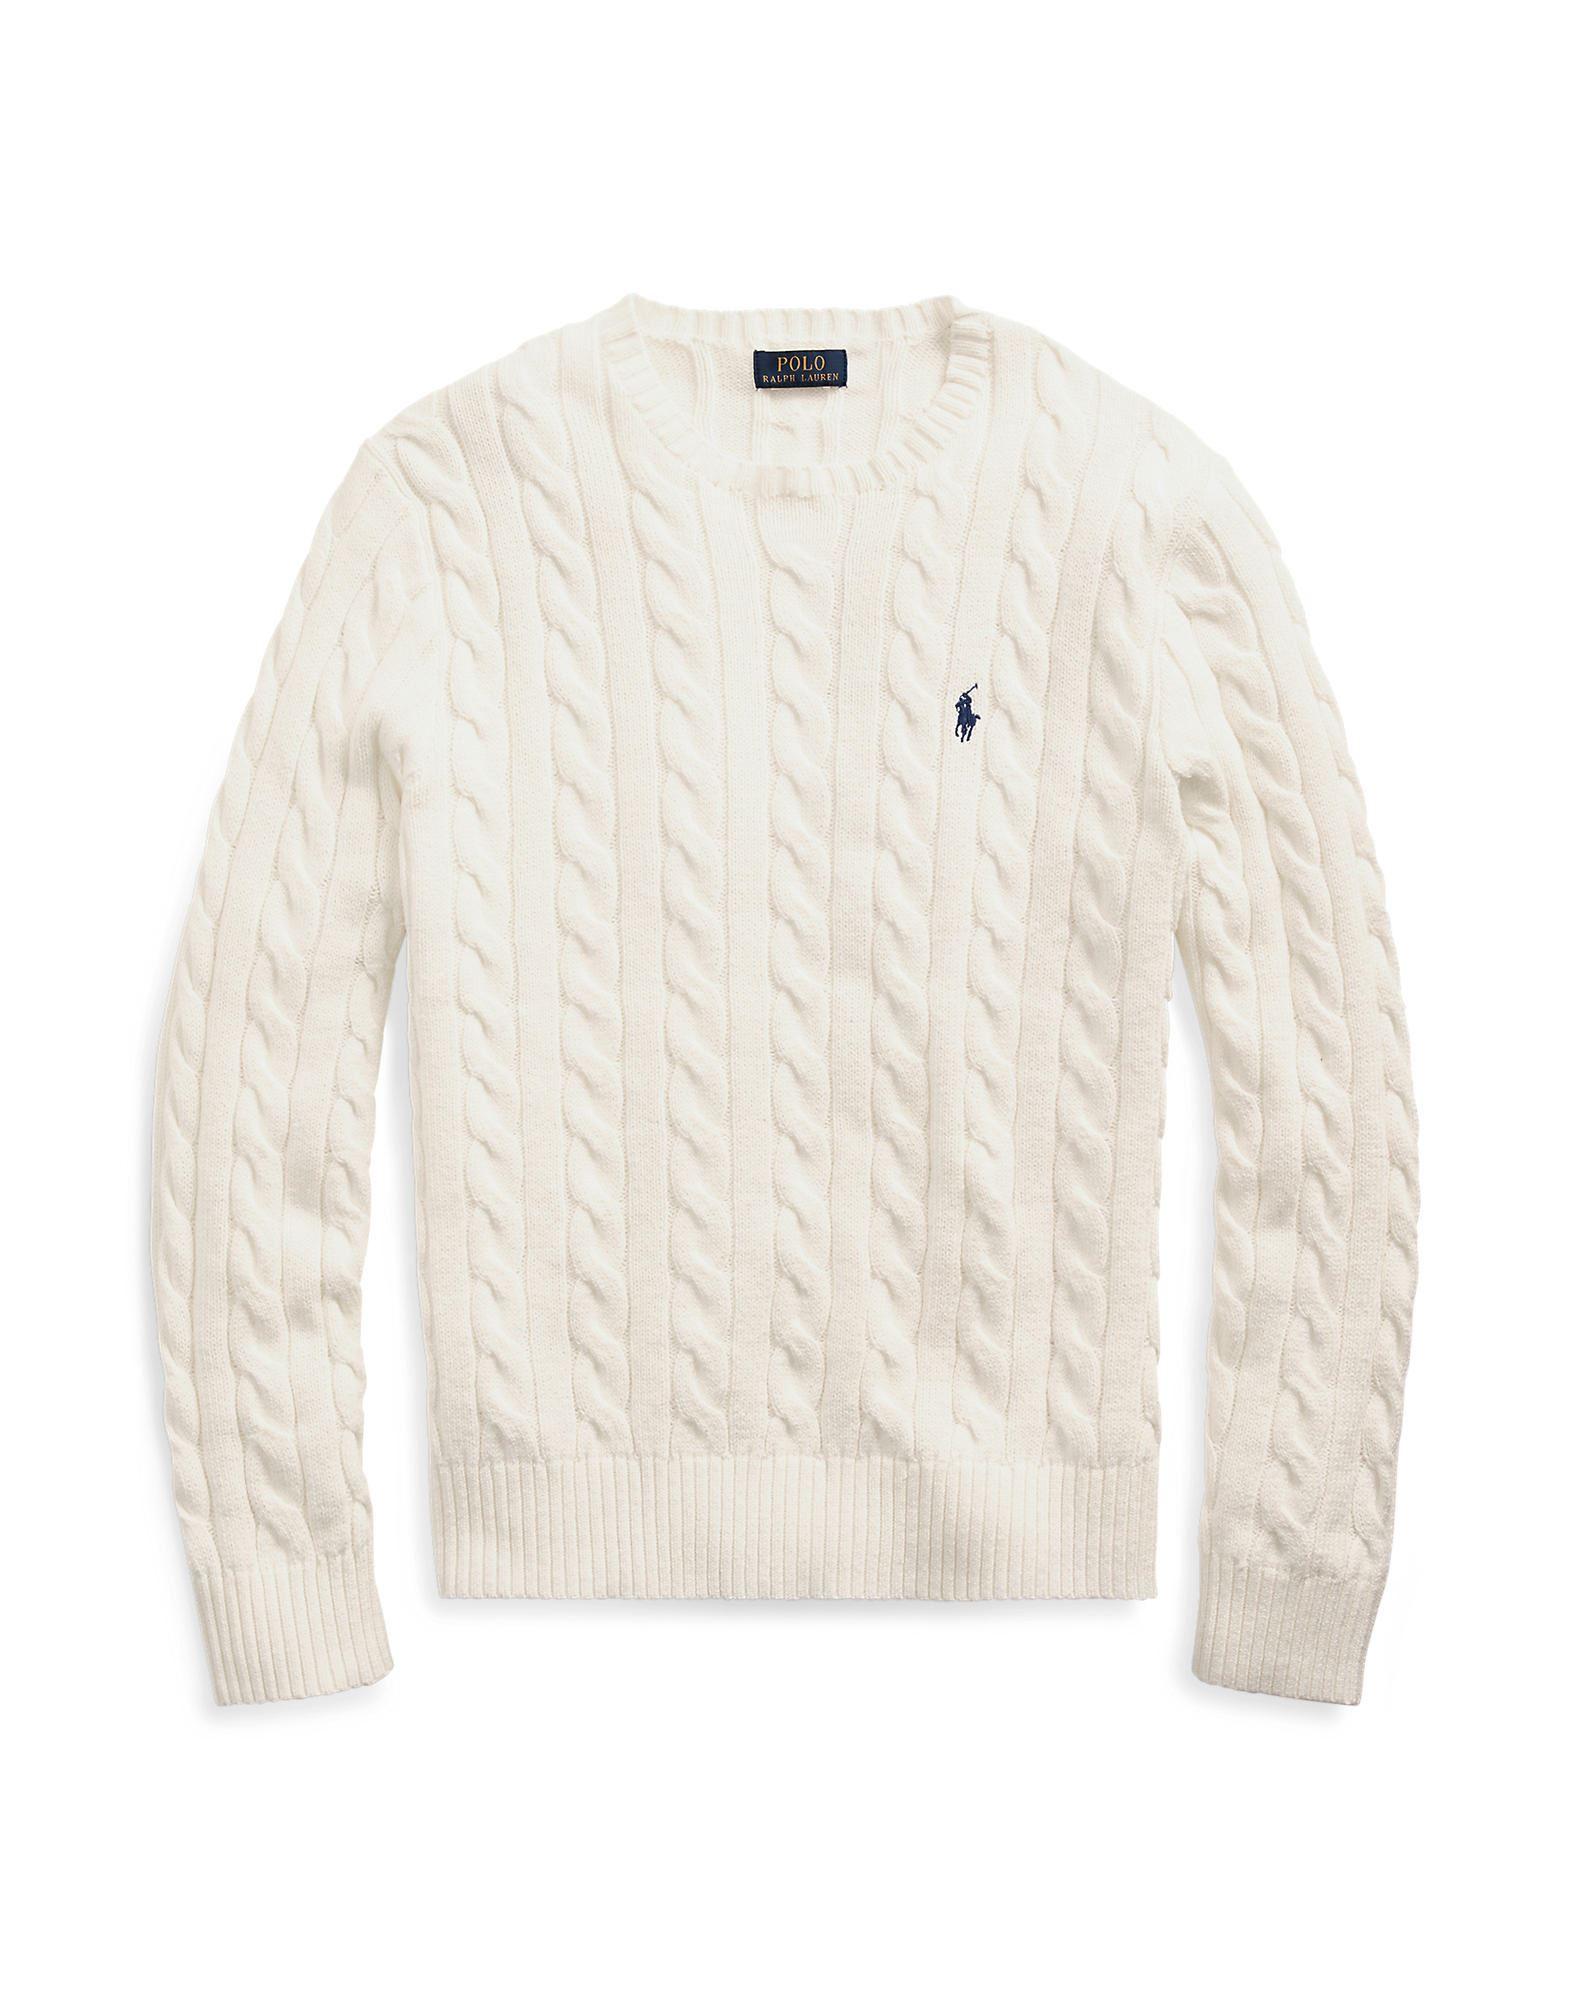 Polo Ralph Lauren Cotton Sweater in Ivory (White) for Men - Save 67% - Lyst